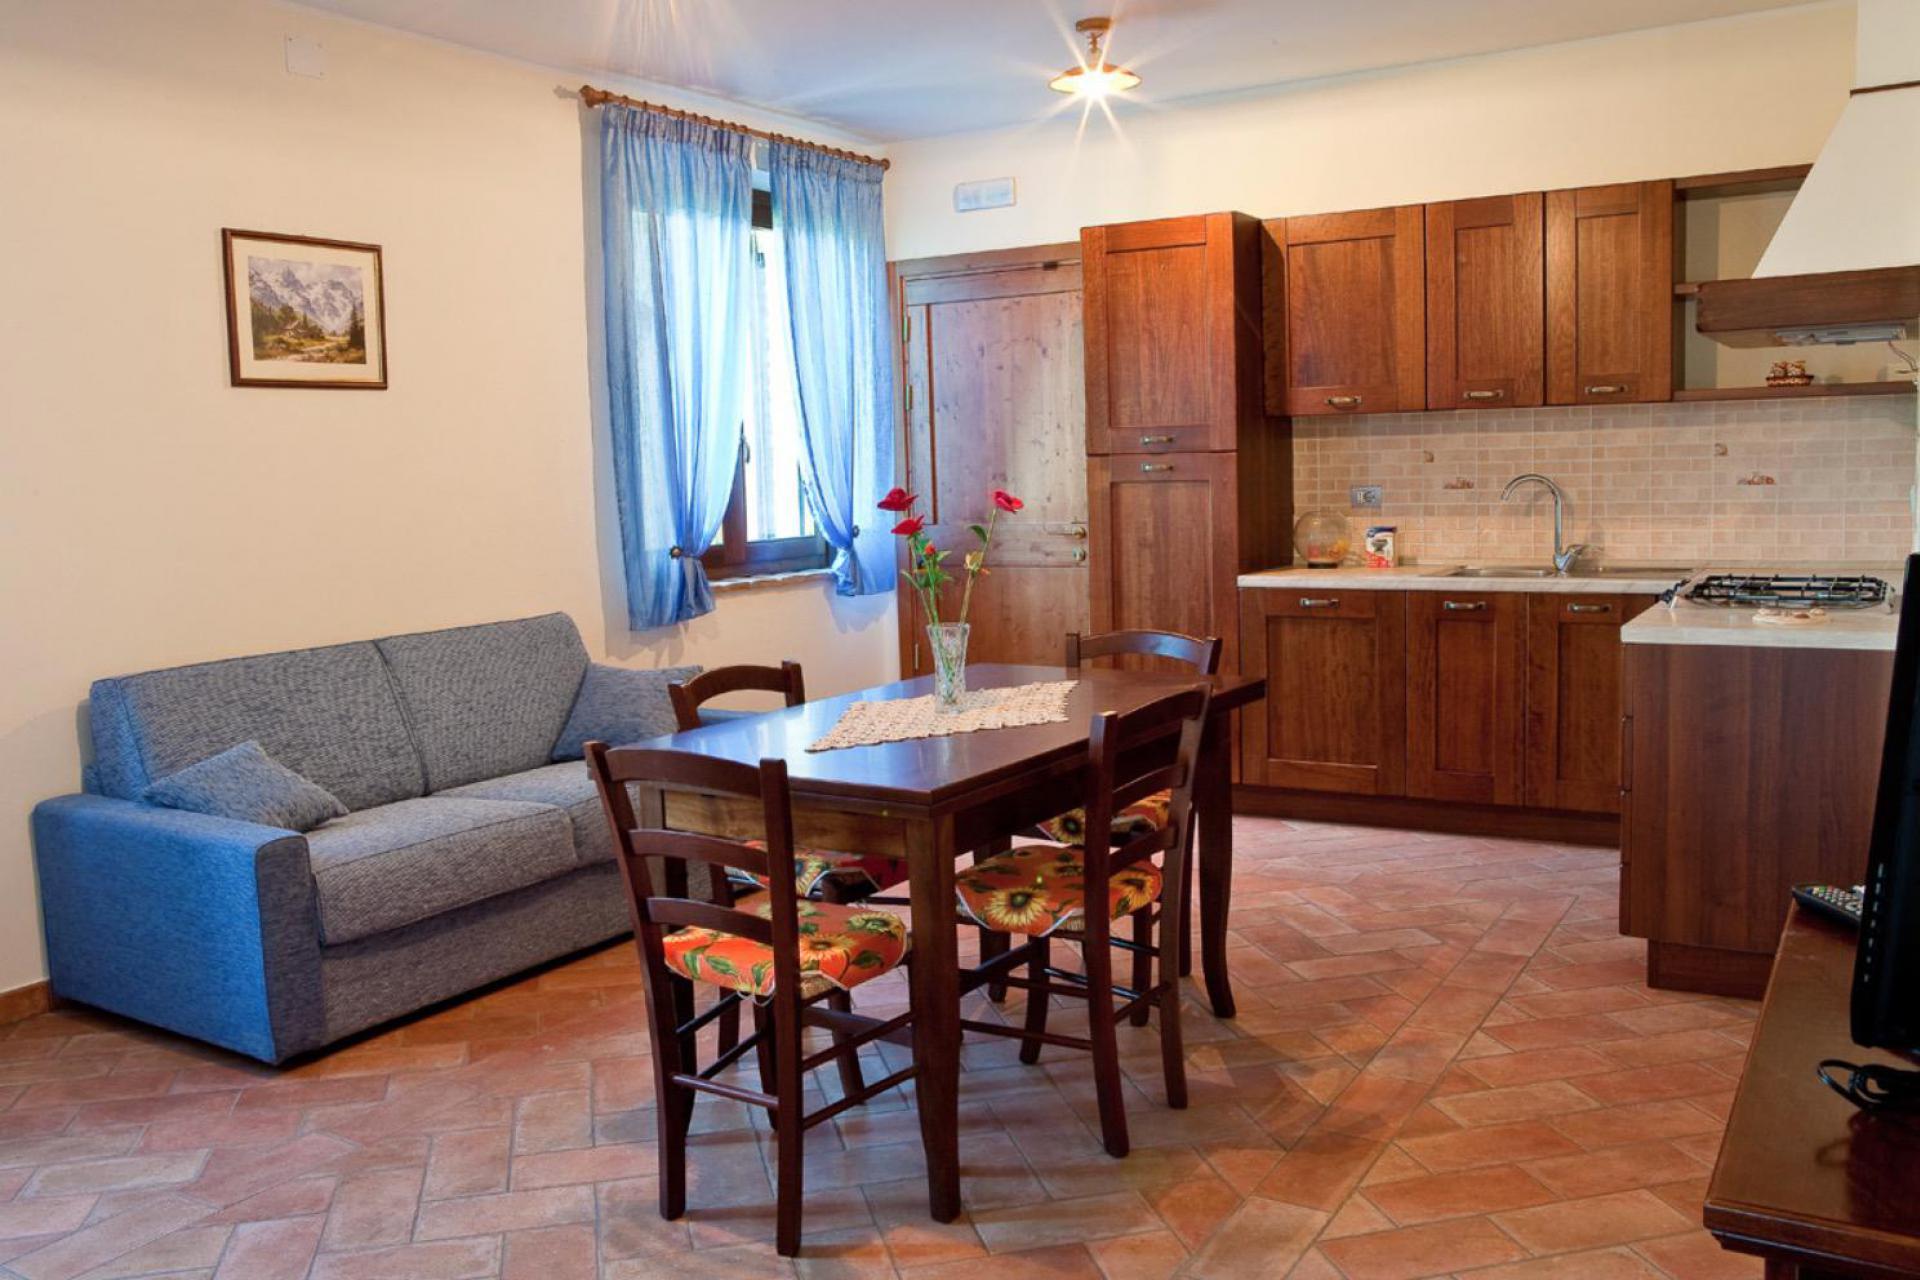 Agriturismo Marche Agriturismo Marche, rural location and child-friendly